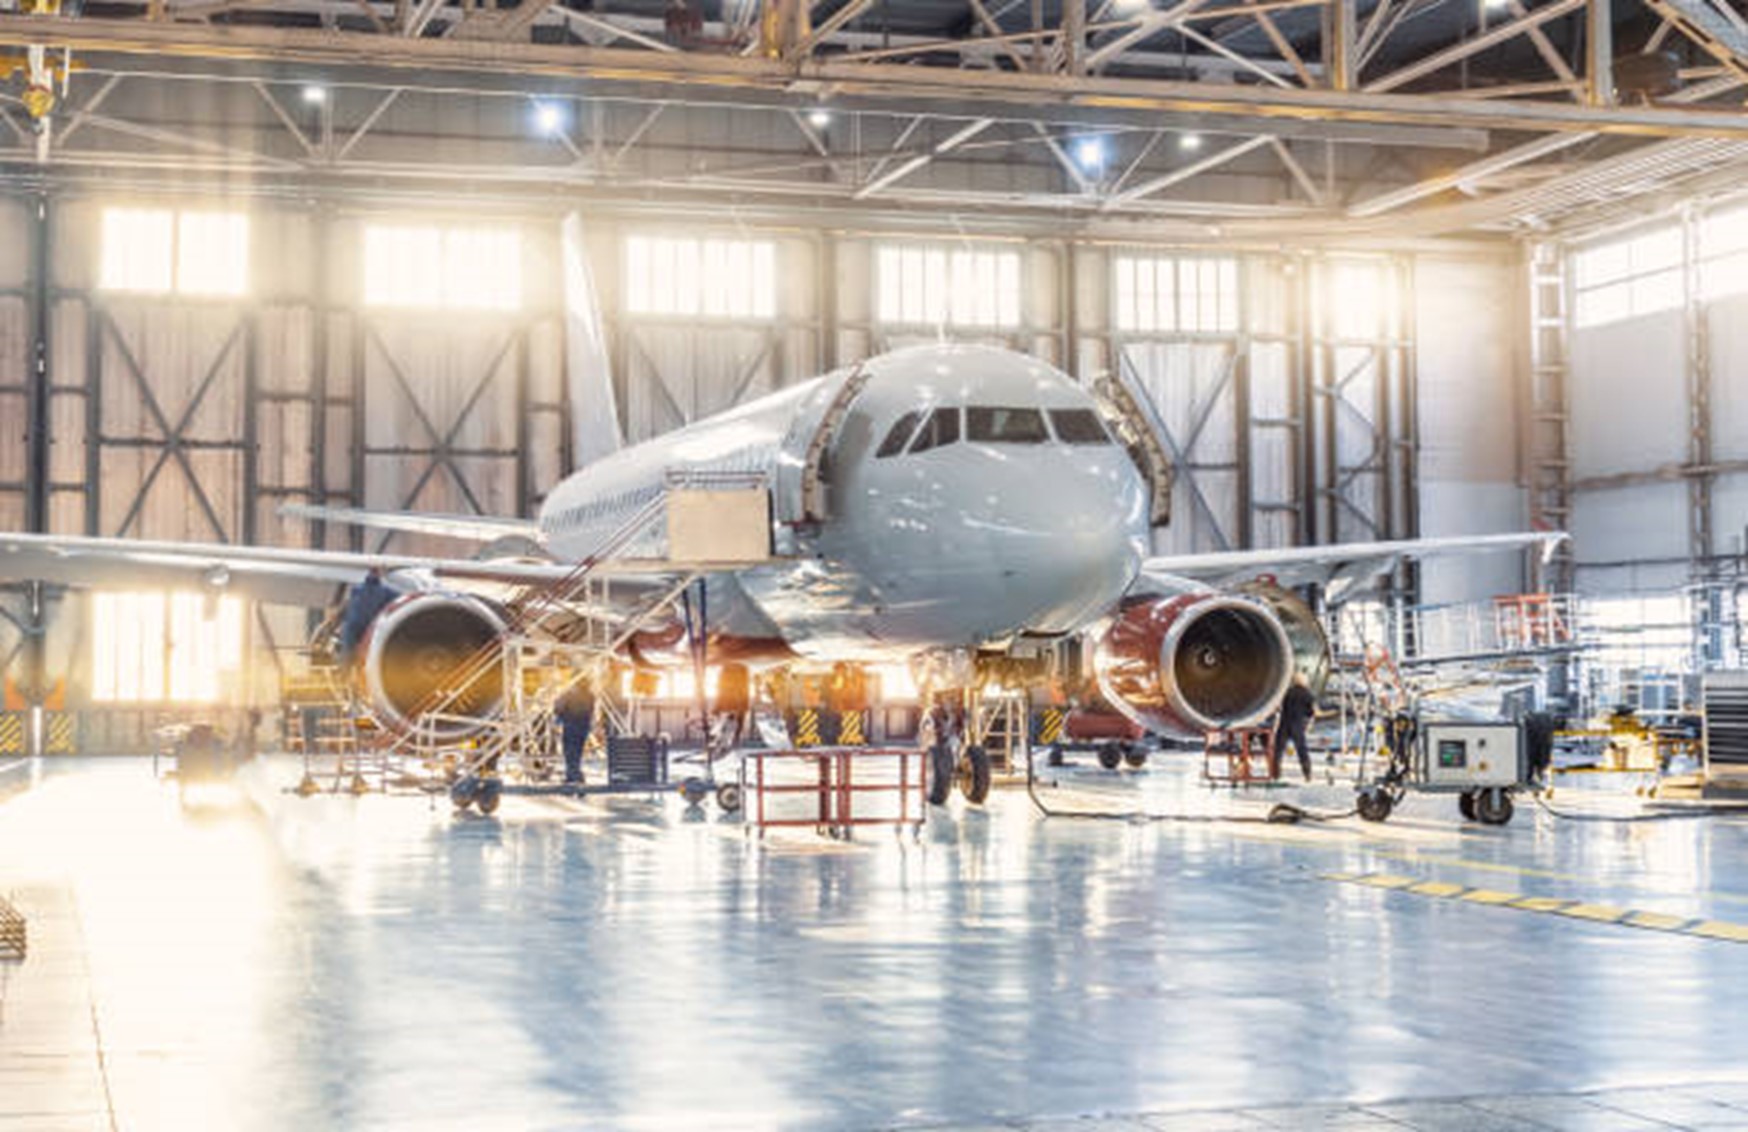 Featured image for What is ISO 9001: 2015. Image shows a top quality aircraft gleaming in an hangar as engineers work on it.